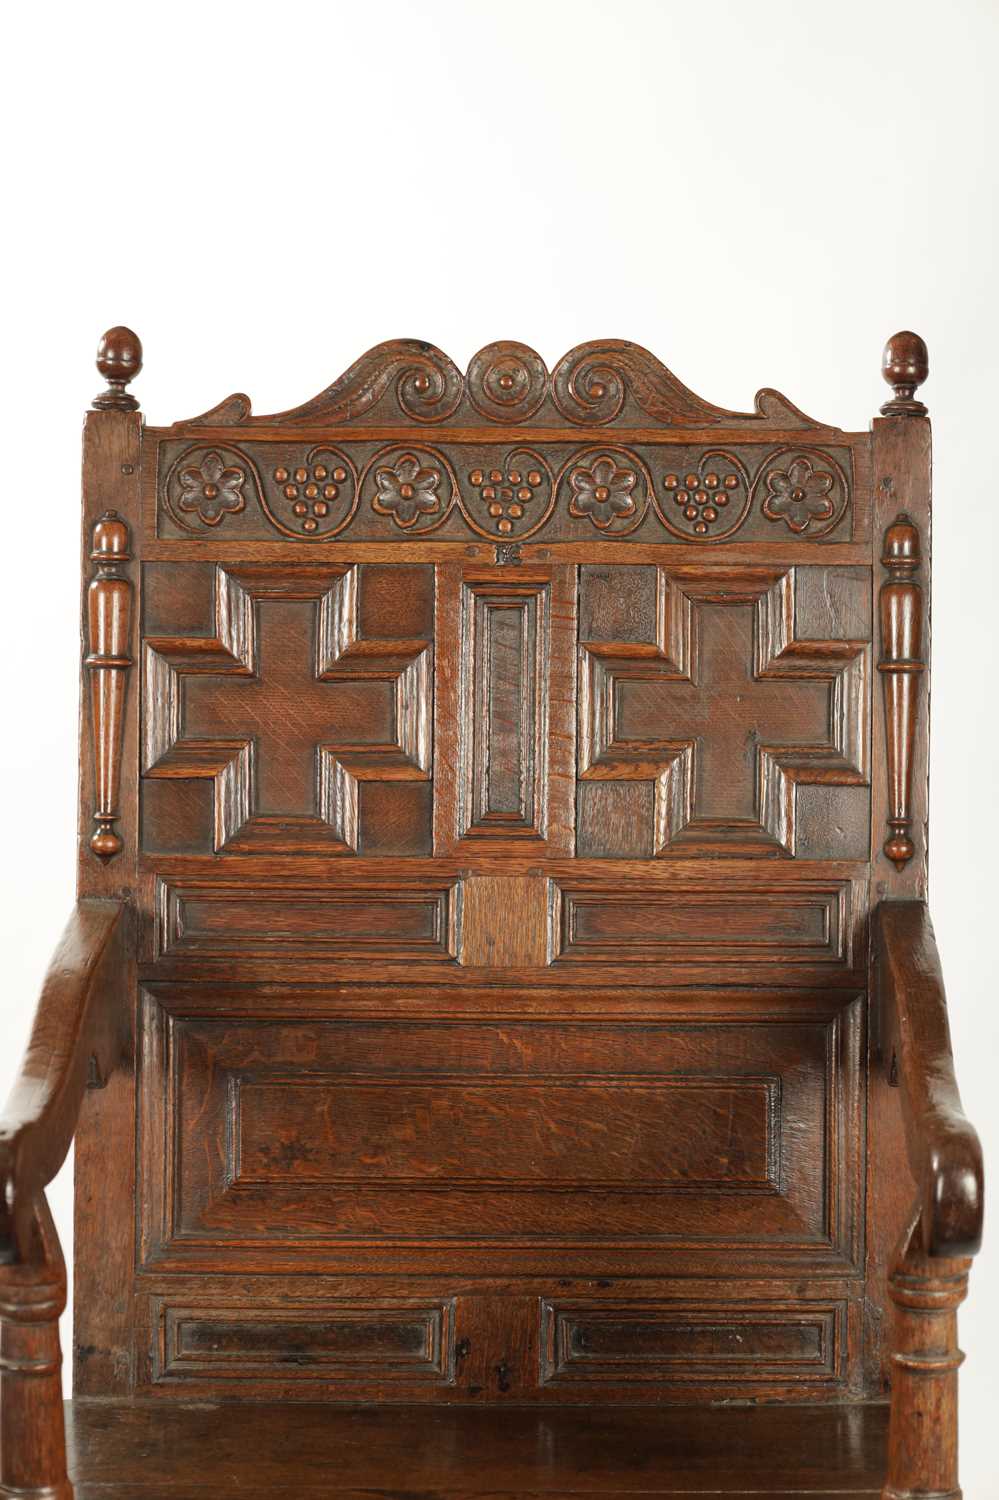 A 17TH CENTURY CARVED OAK JACOBEAN STYLE WAINSCOT CHAIR - Image 3 of 13